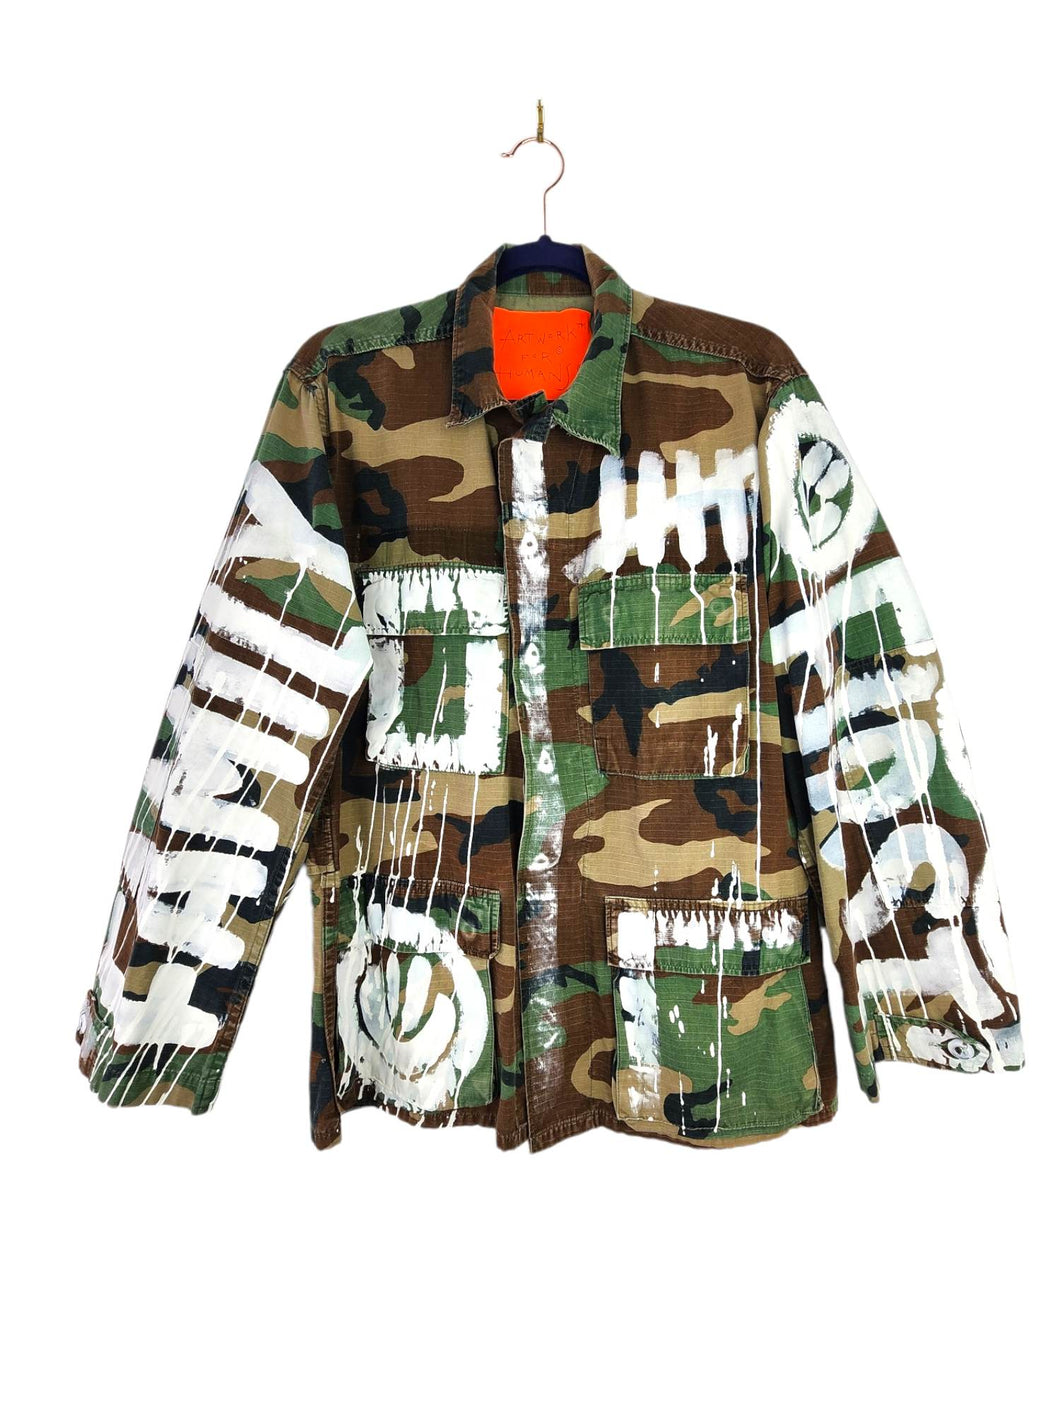 A Camo Utility Jacket for $50 (Somewhere, Lately)